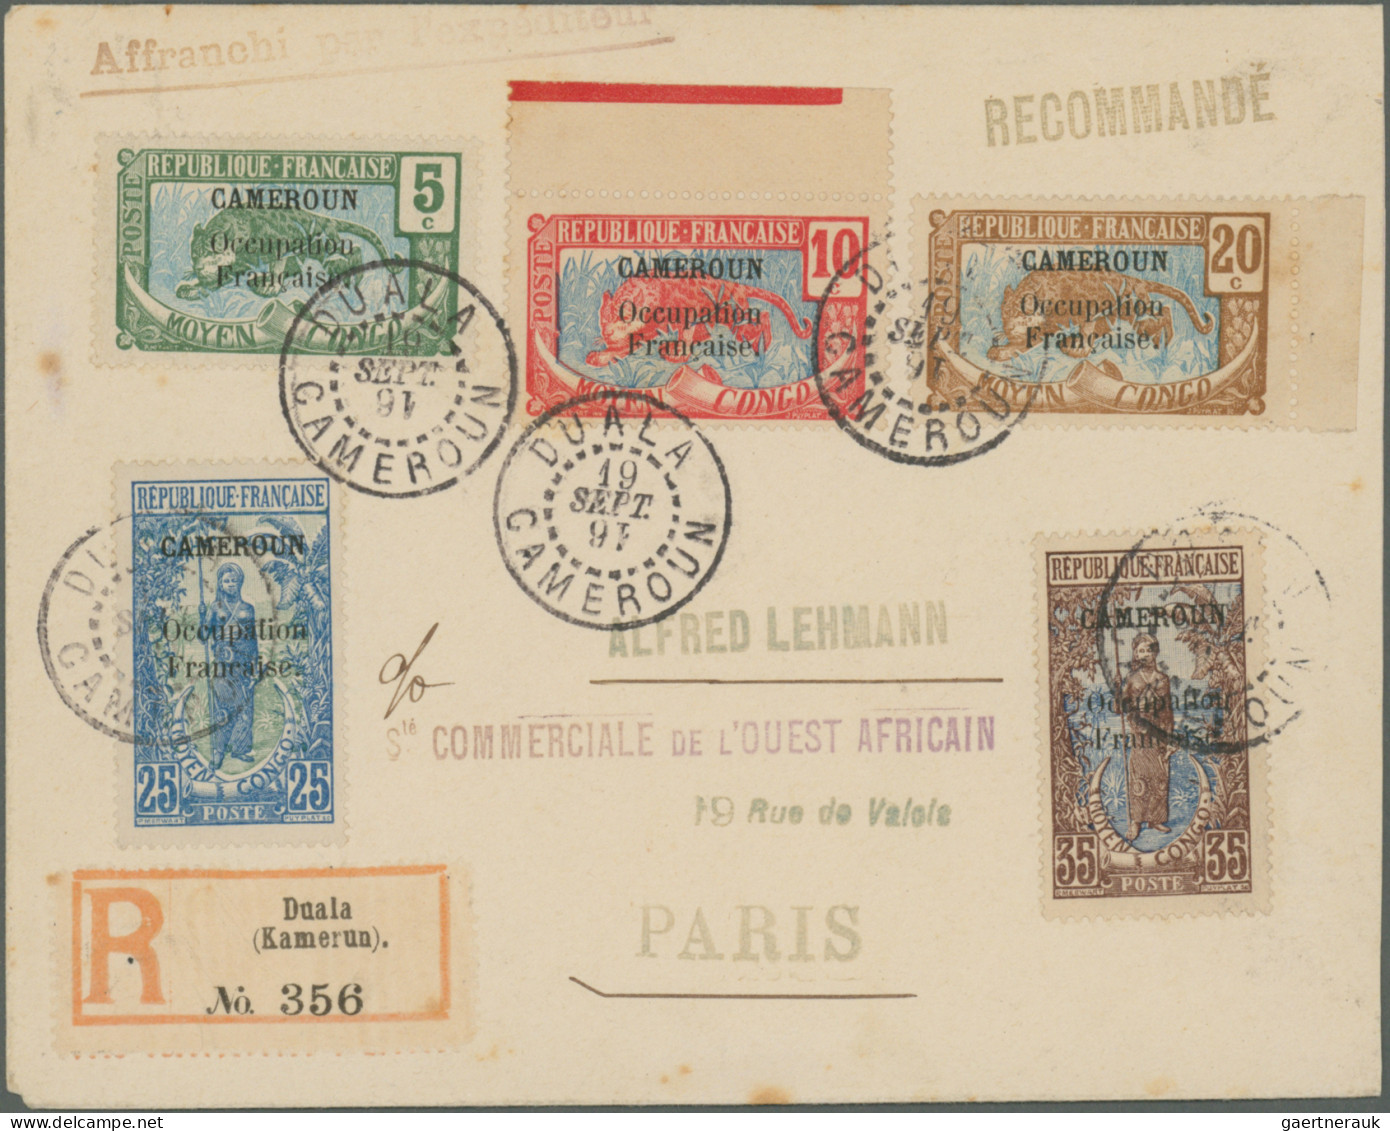 France: 1857/1965, France+area, lot of apprx. 100 covers/cards, e.g. nice Napole